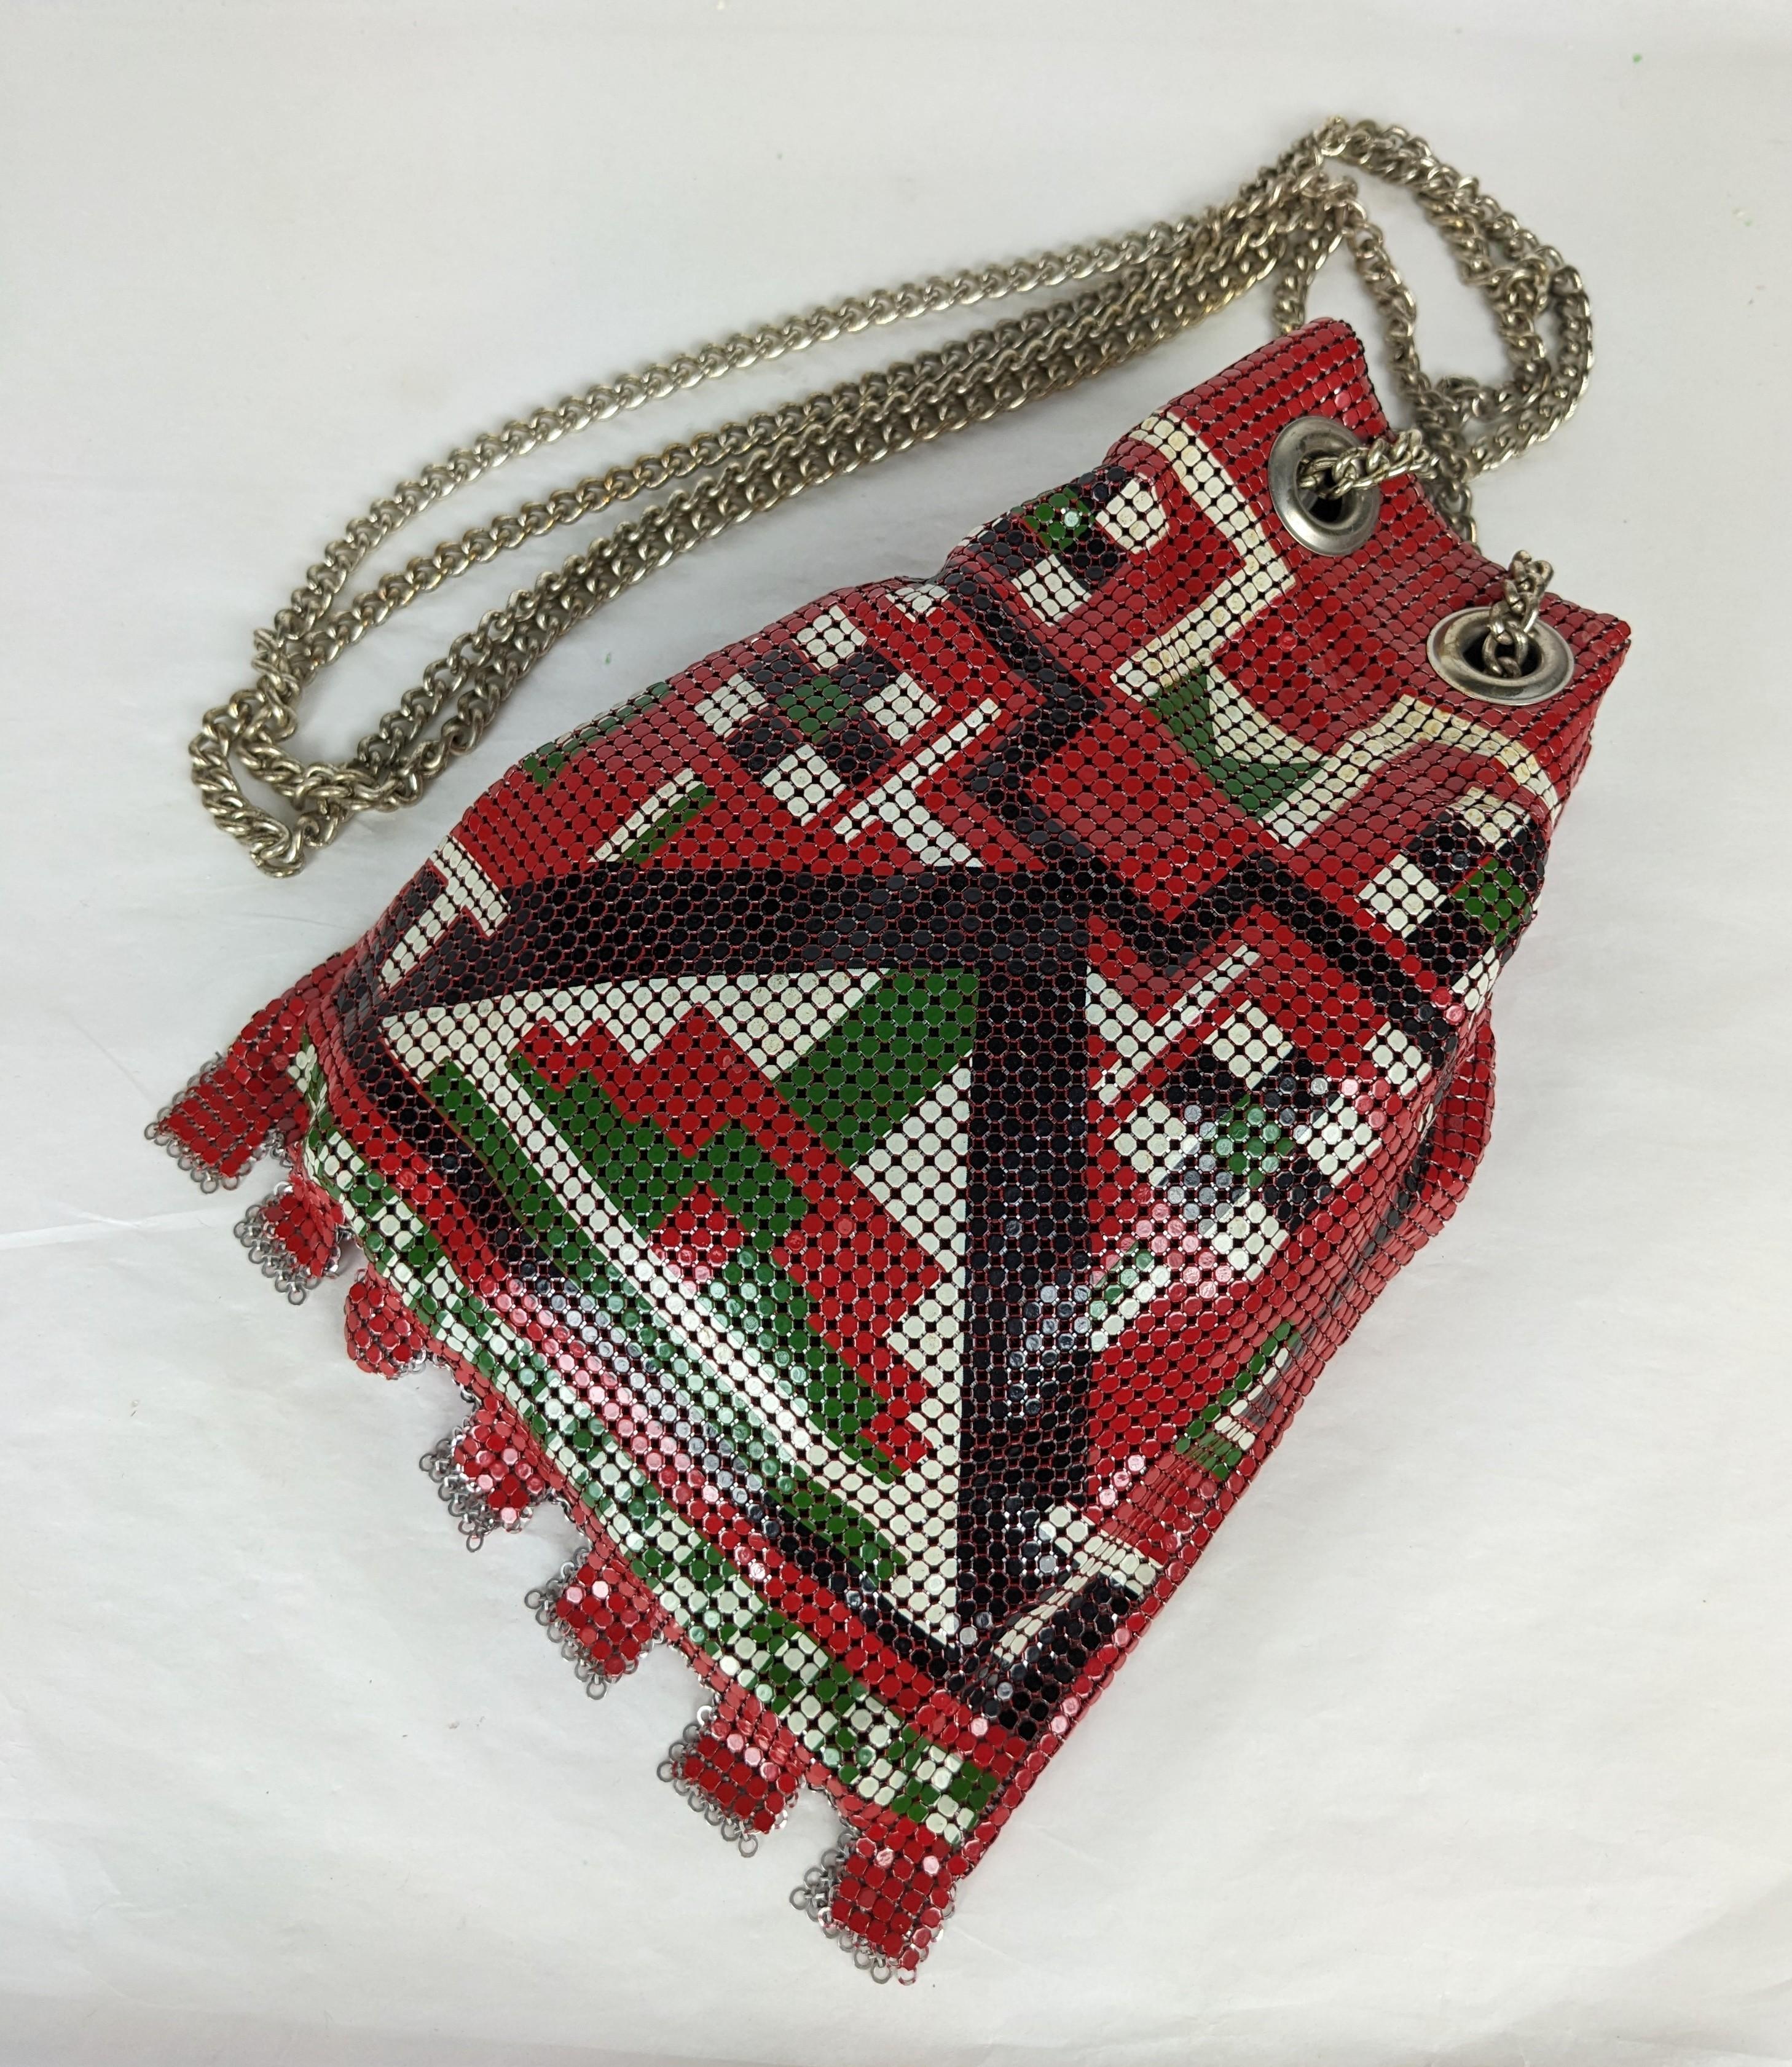 Enamel Metal Mesh Shoulder Bag made probably by Whiting Davis in the 1970's. Enamel in Deco style motifs in red, olive, white and black throughout. Drawstring chain with black lining. 
9